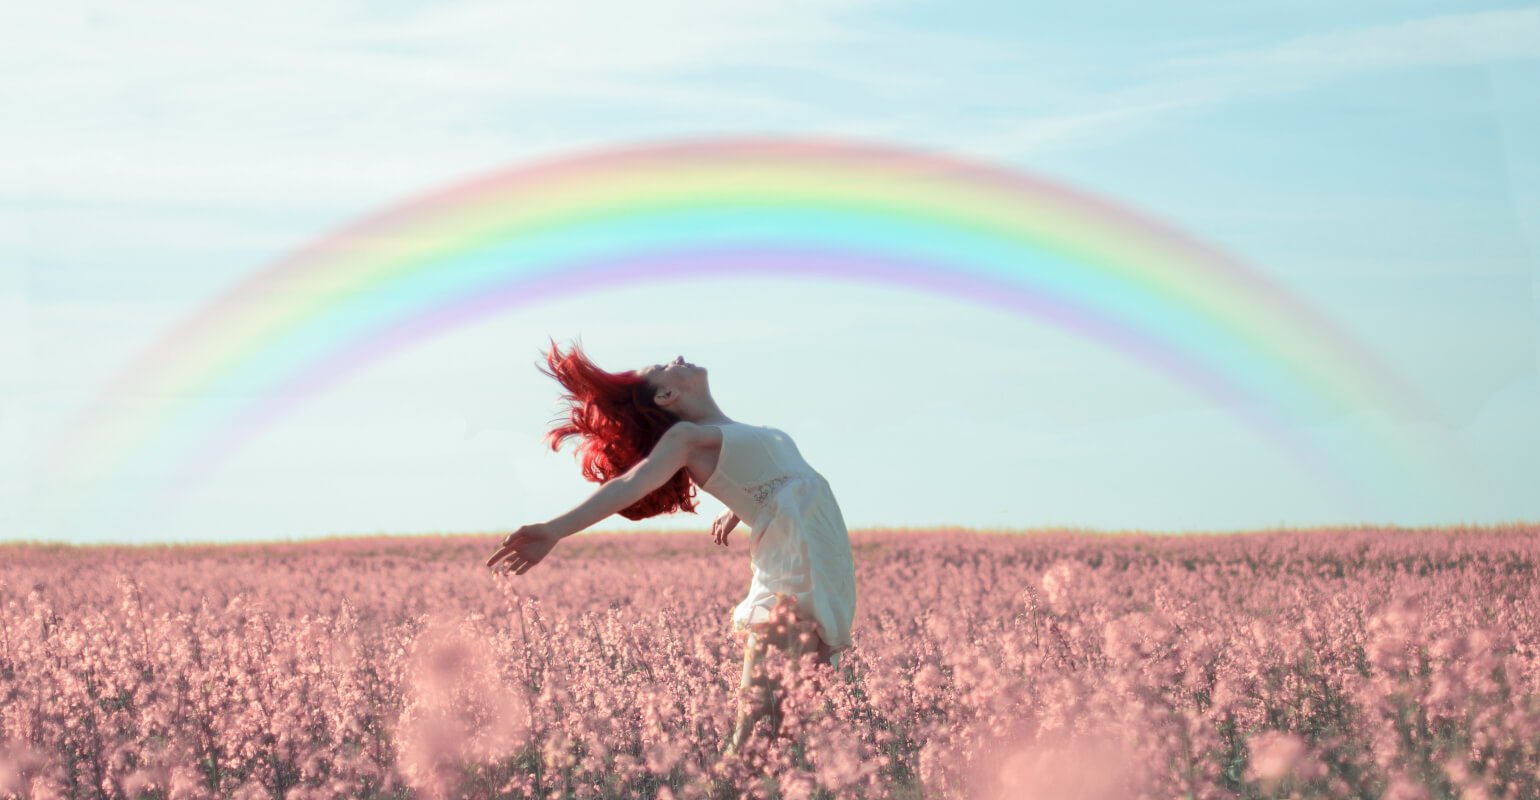 A red haired girl dancing in pink flowers with a rainbow over her head